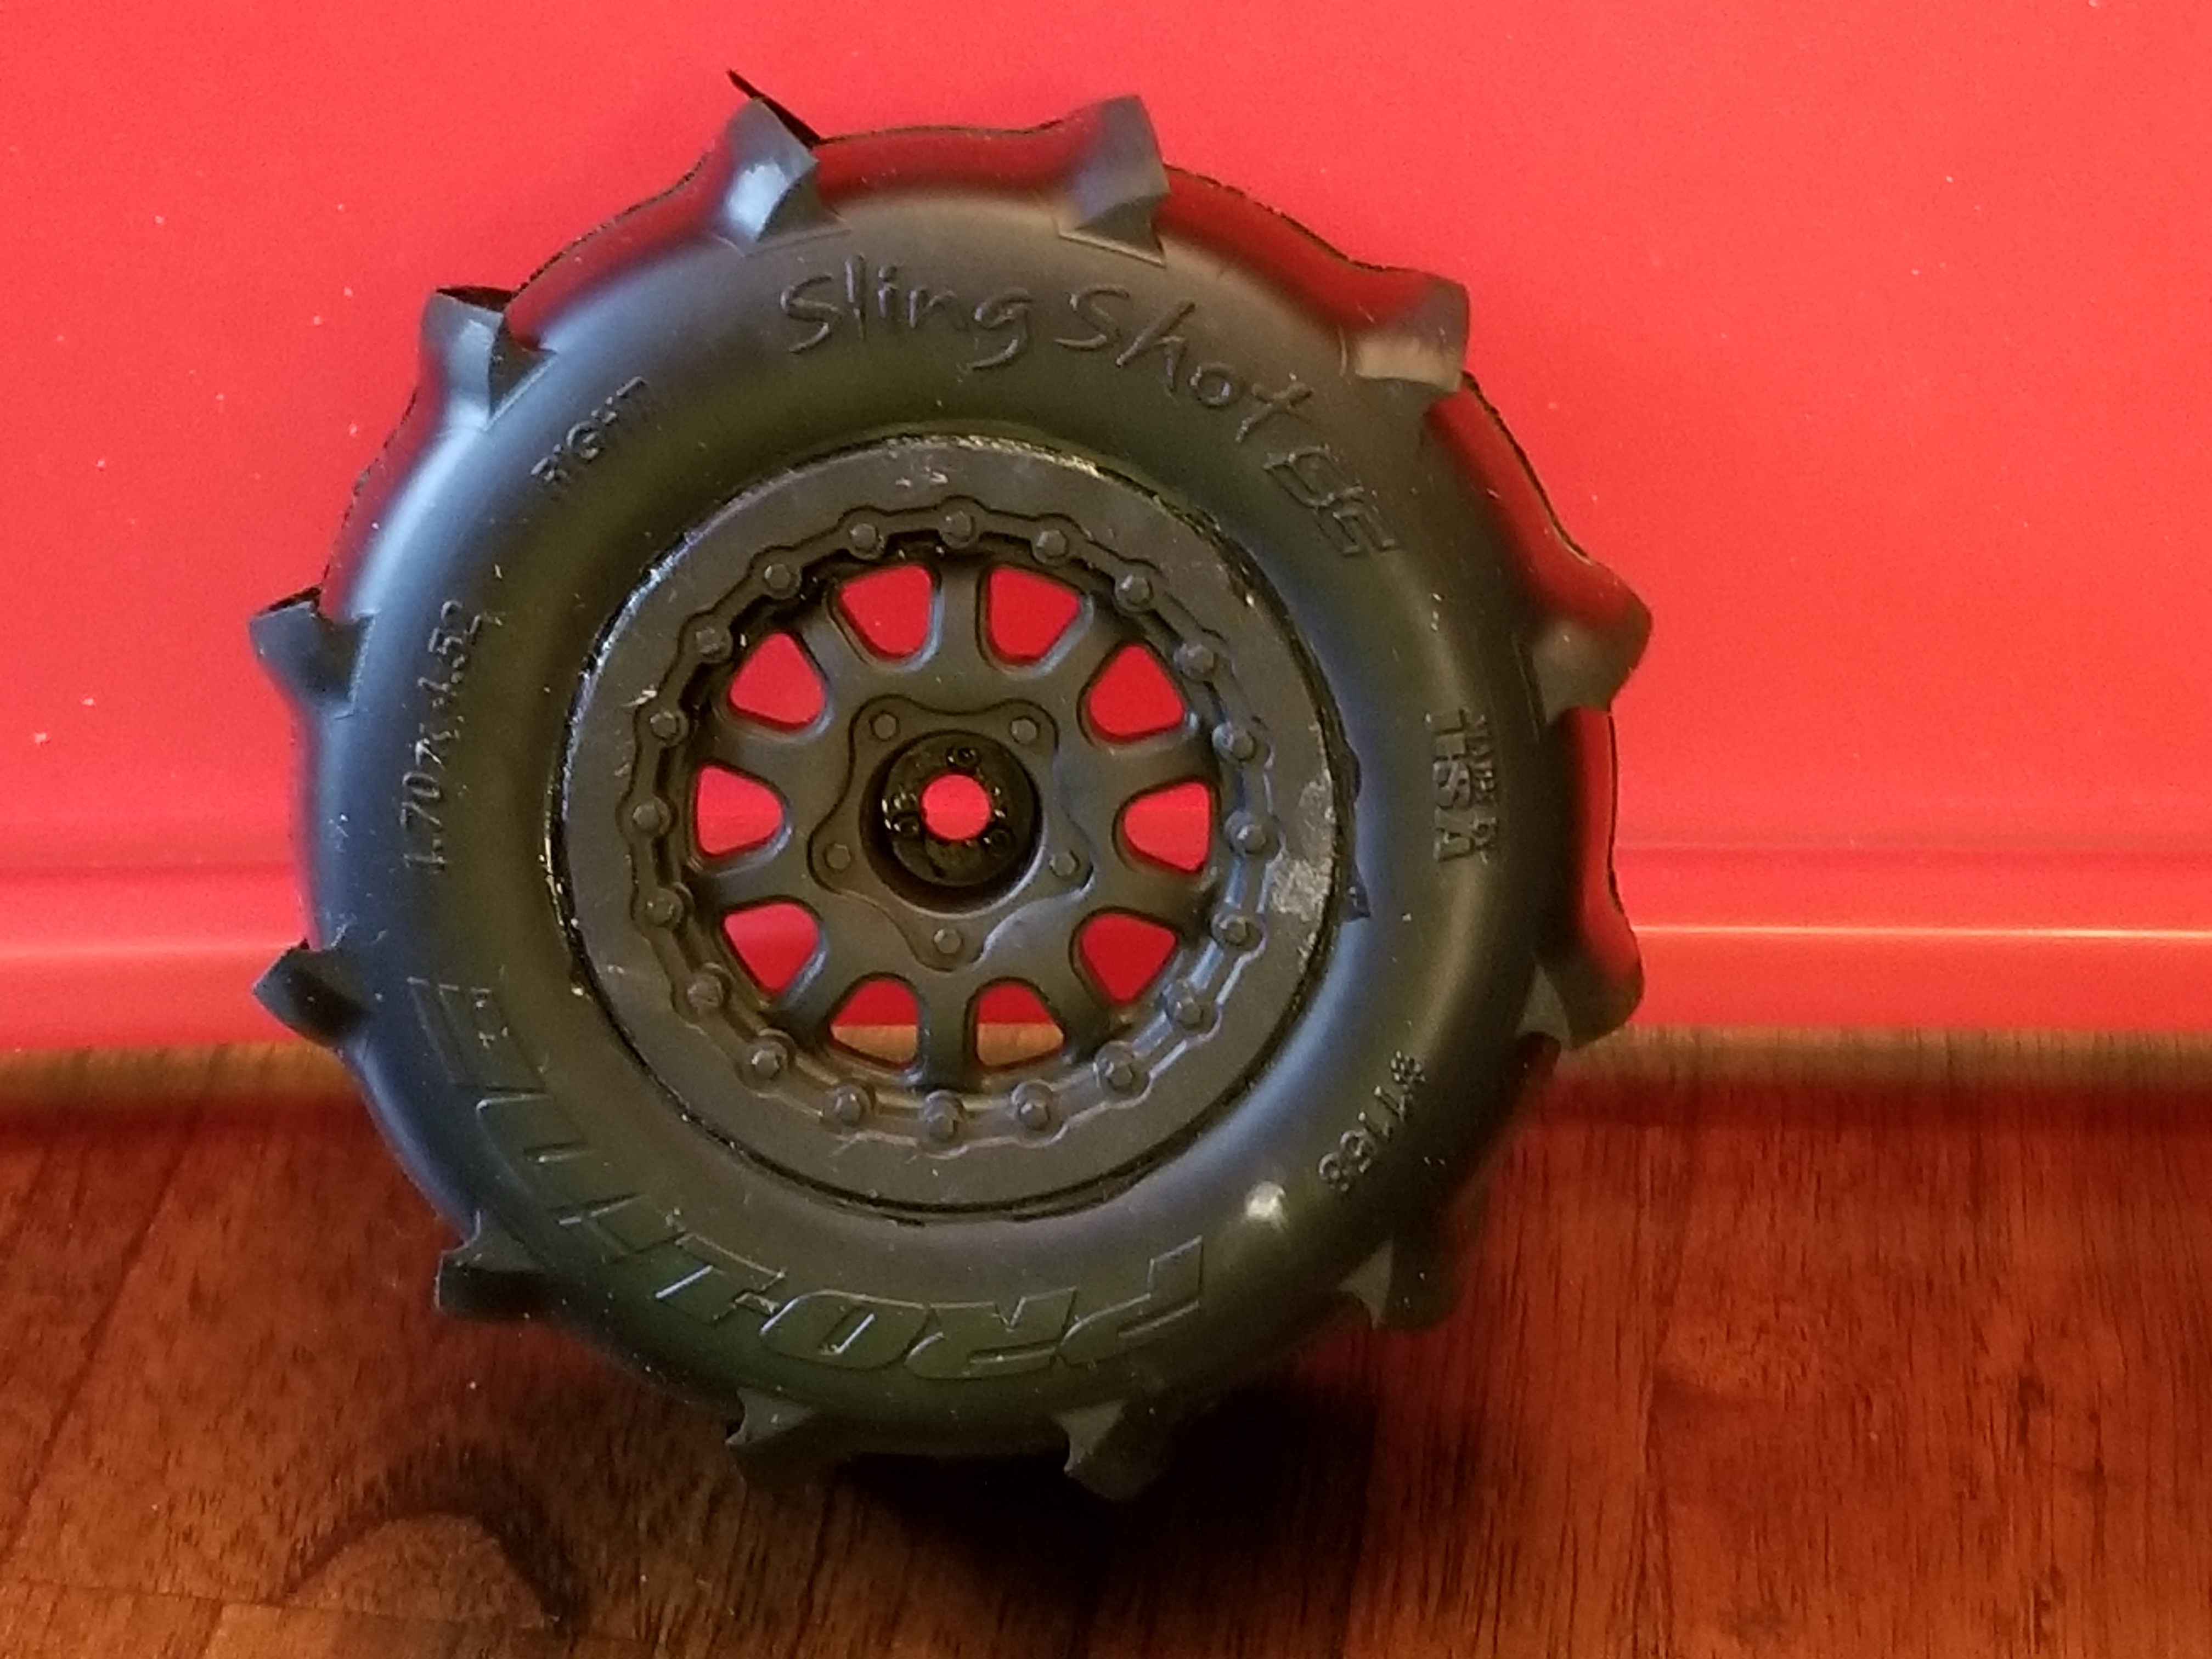 Proline Sling Shot Paddle Tire Review